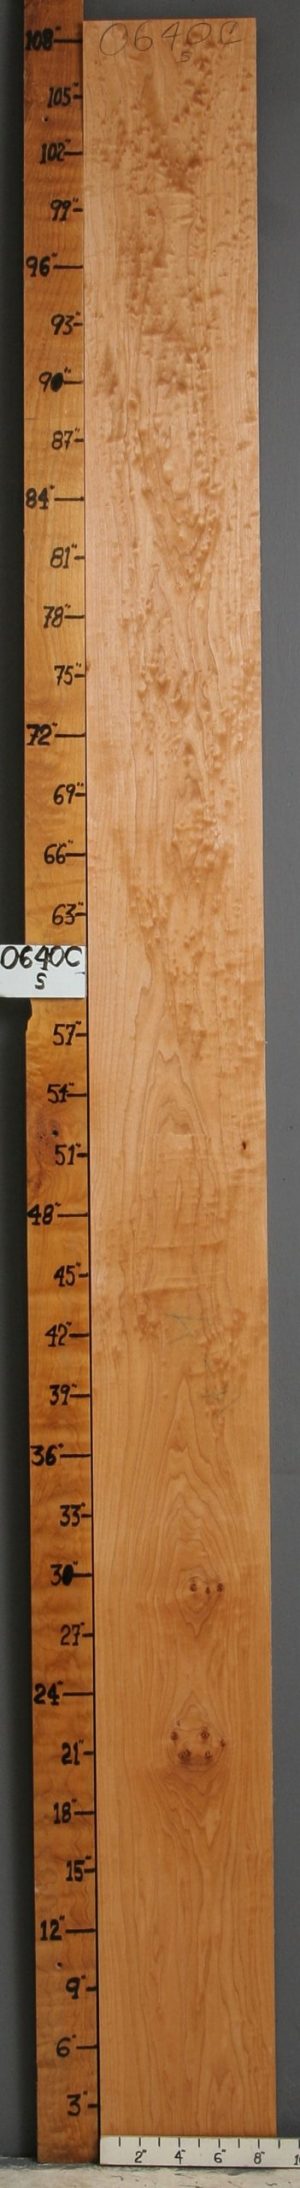 AAAA QUILTED MAPLE LUMBER 8"3/4 X 109" X 4/4 (NWT-0640C)